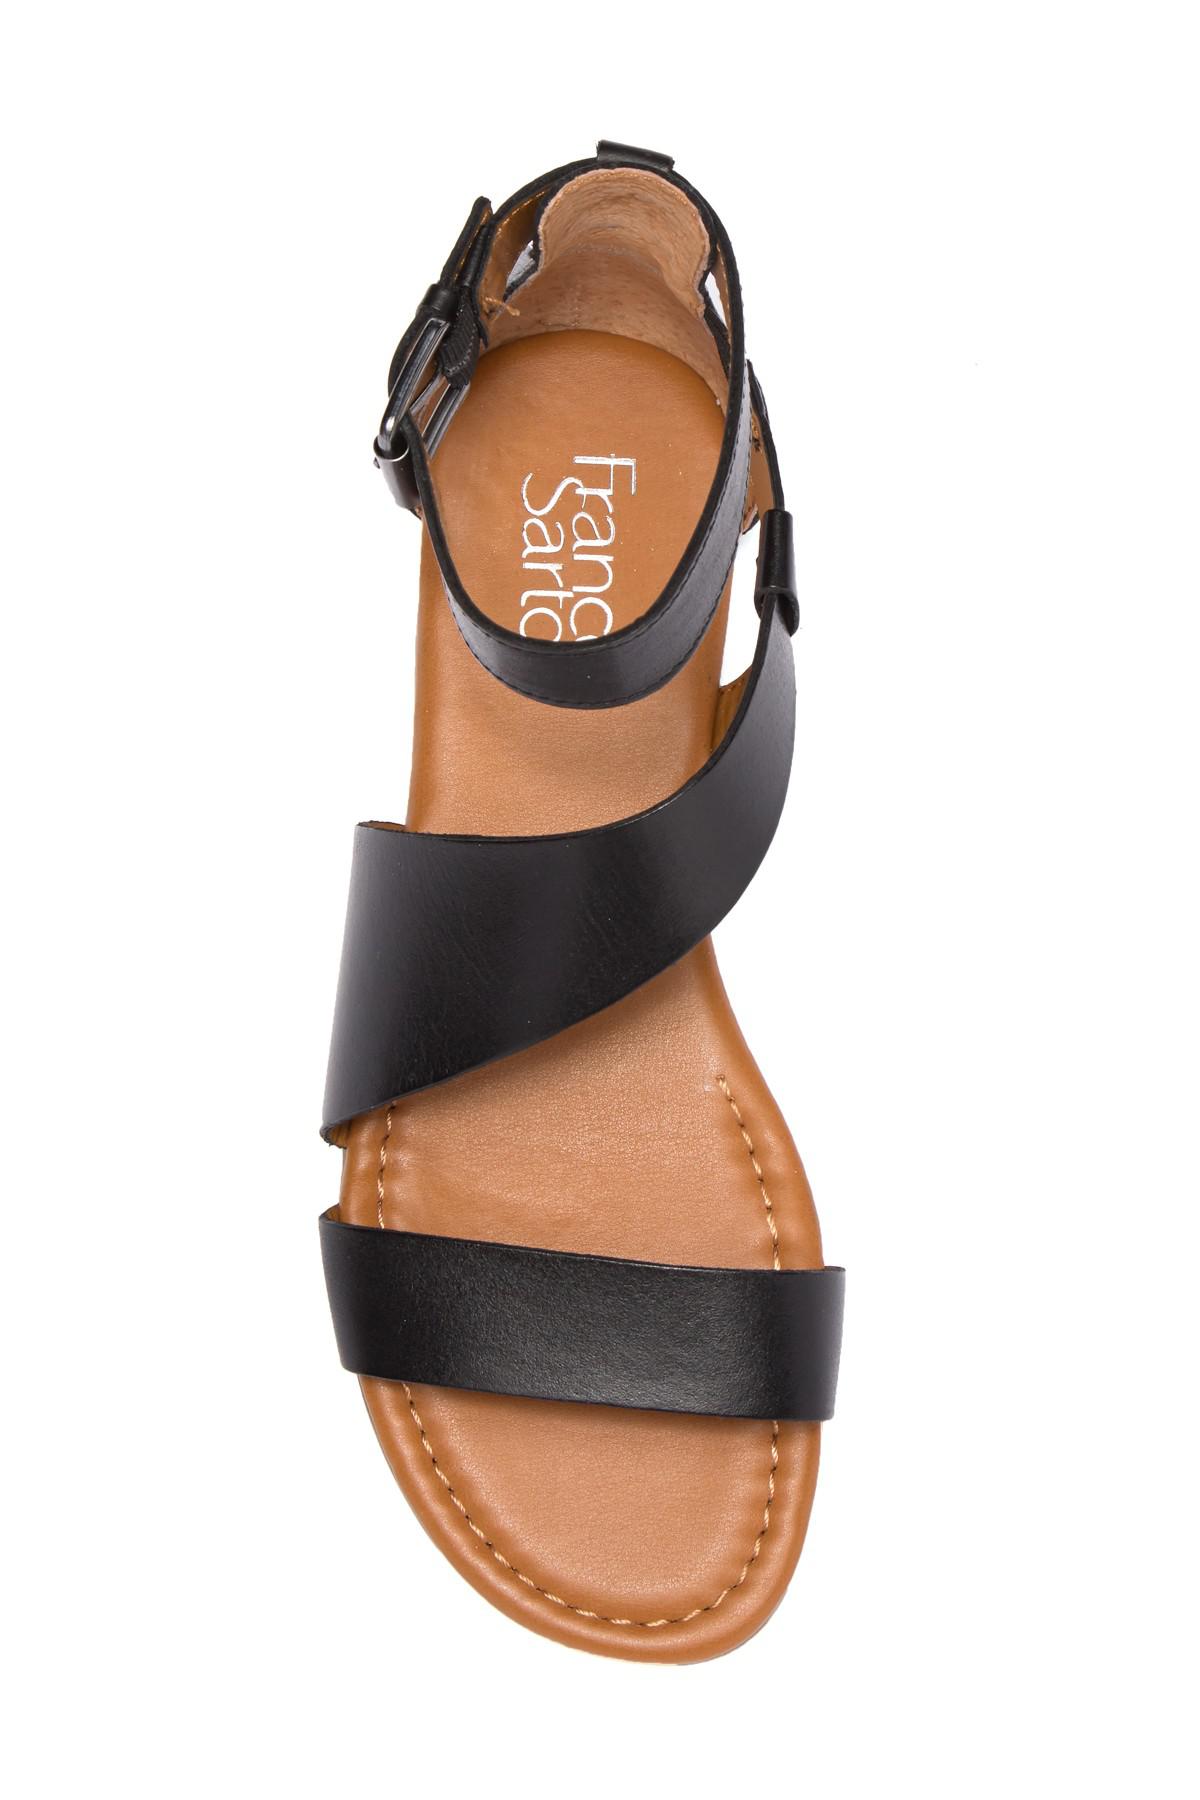 Franco Sarto Griffith Leather Sandal in 